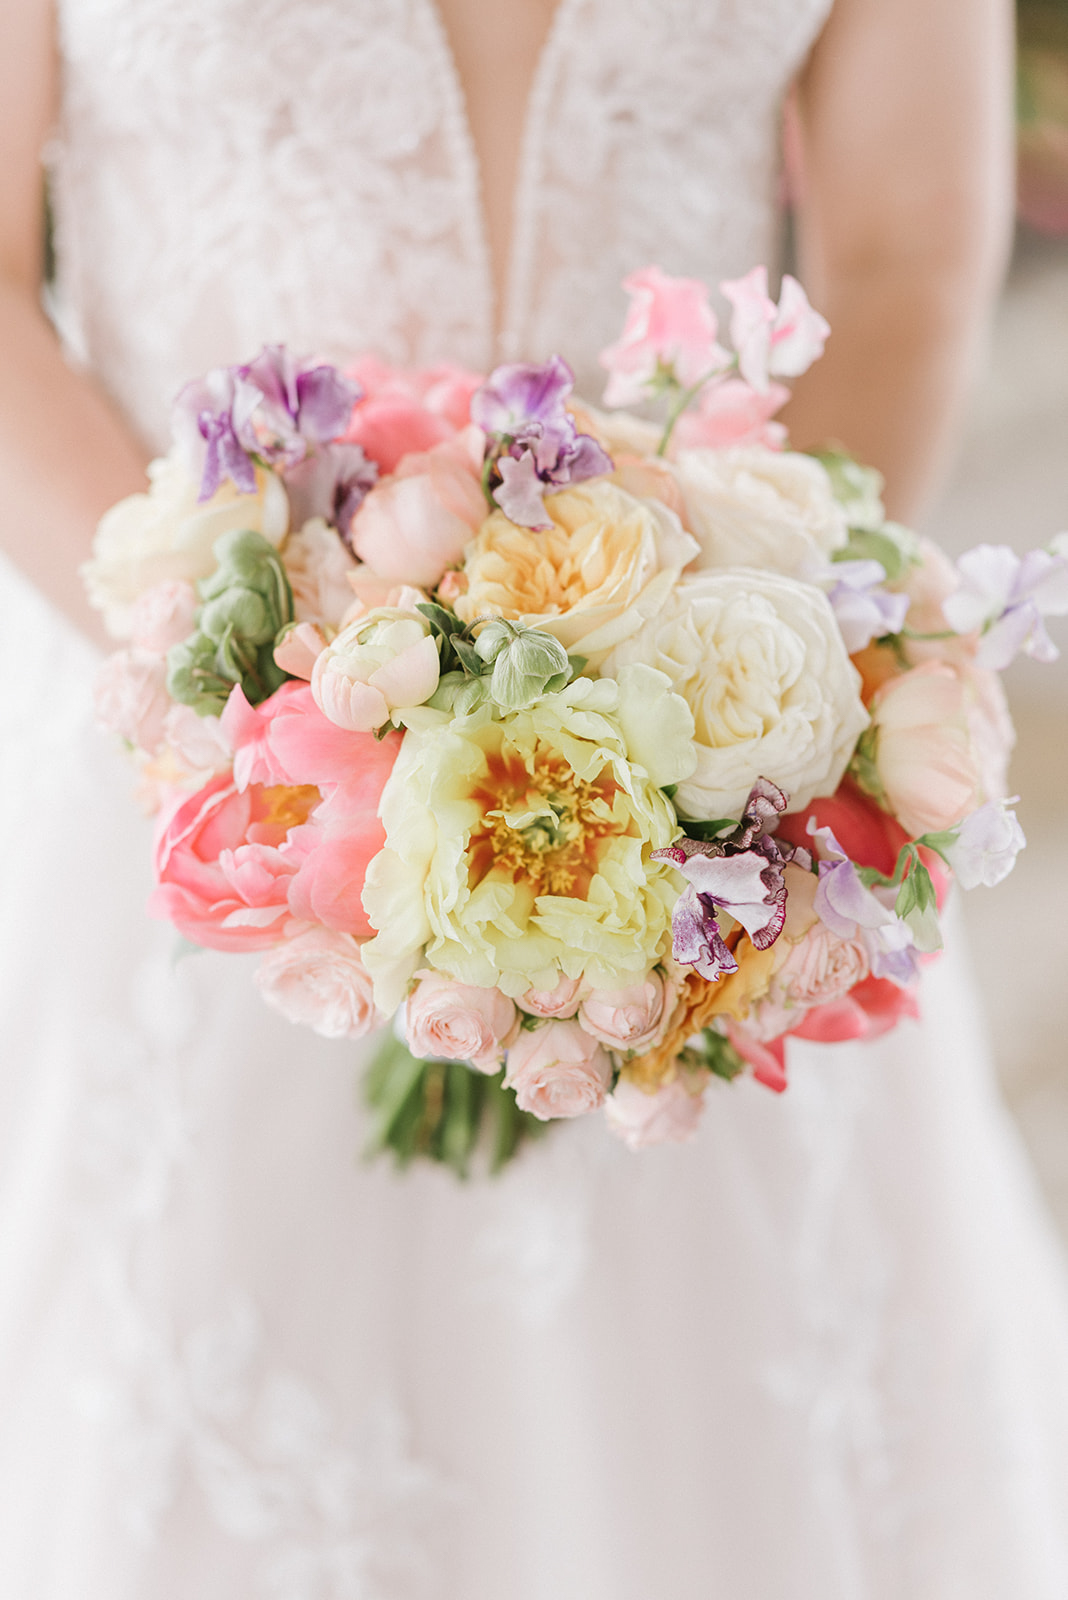 A perfect spring bridal bouquet